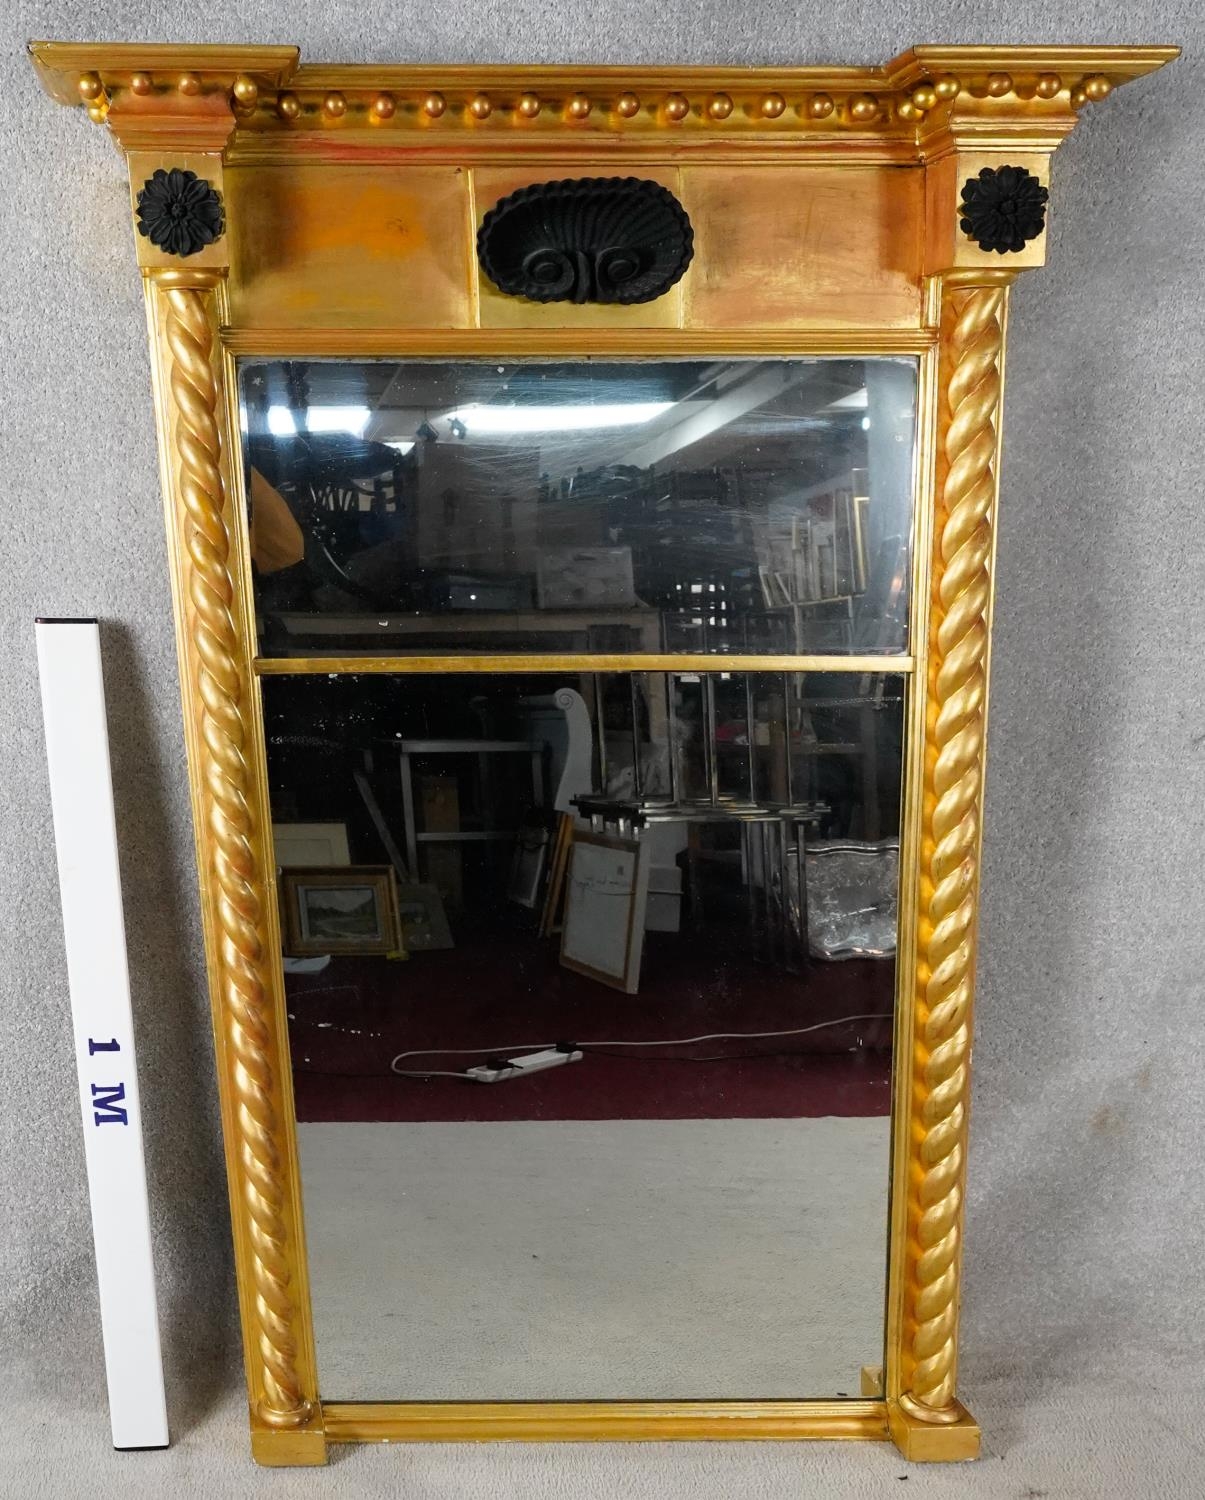 A Regency giltwood full height pier mirror with ball decorated architectural cornice above - Image 2 of 4